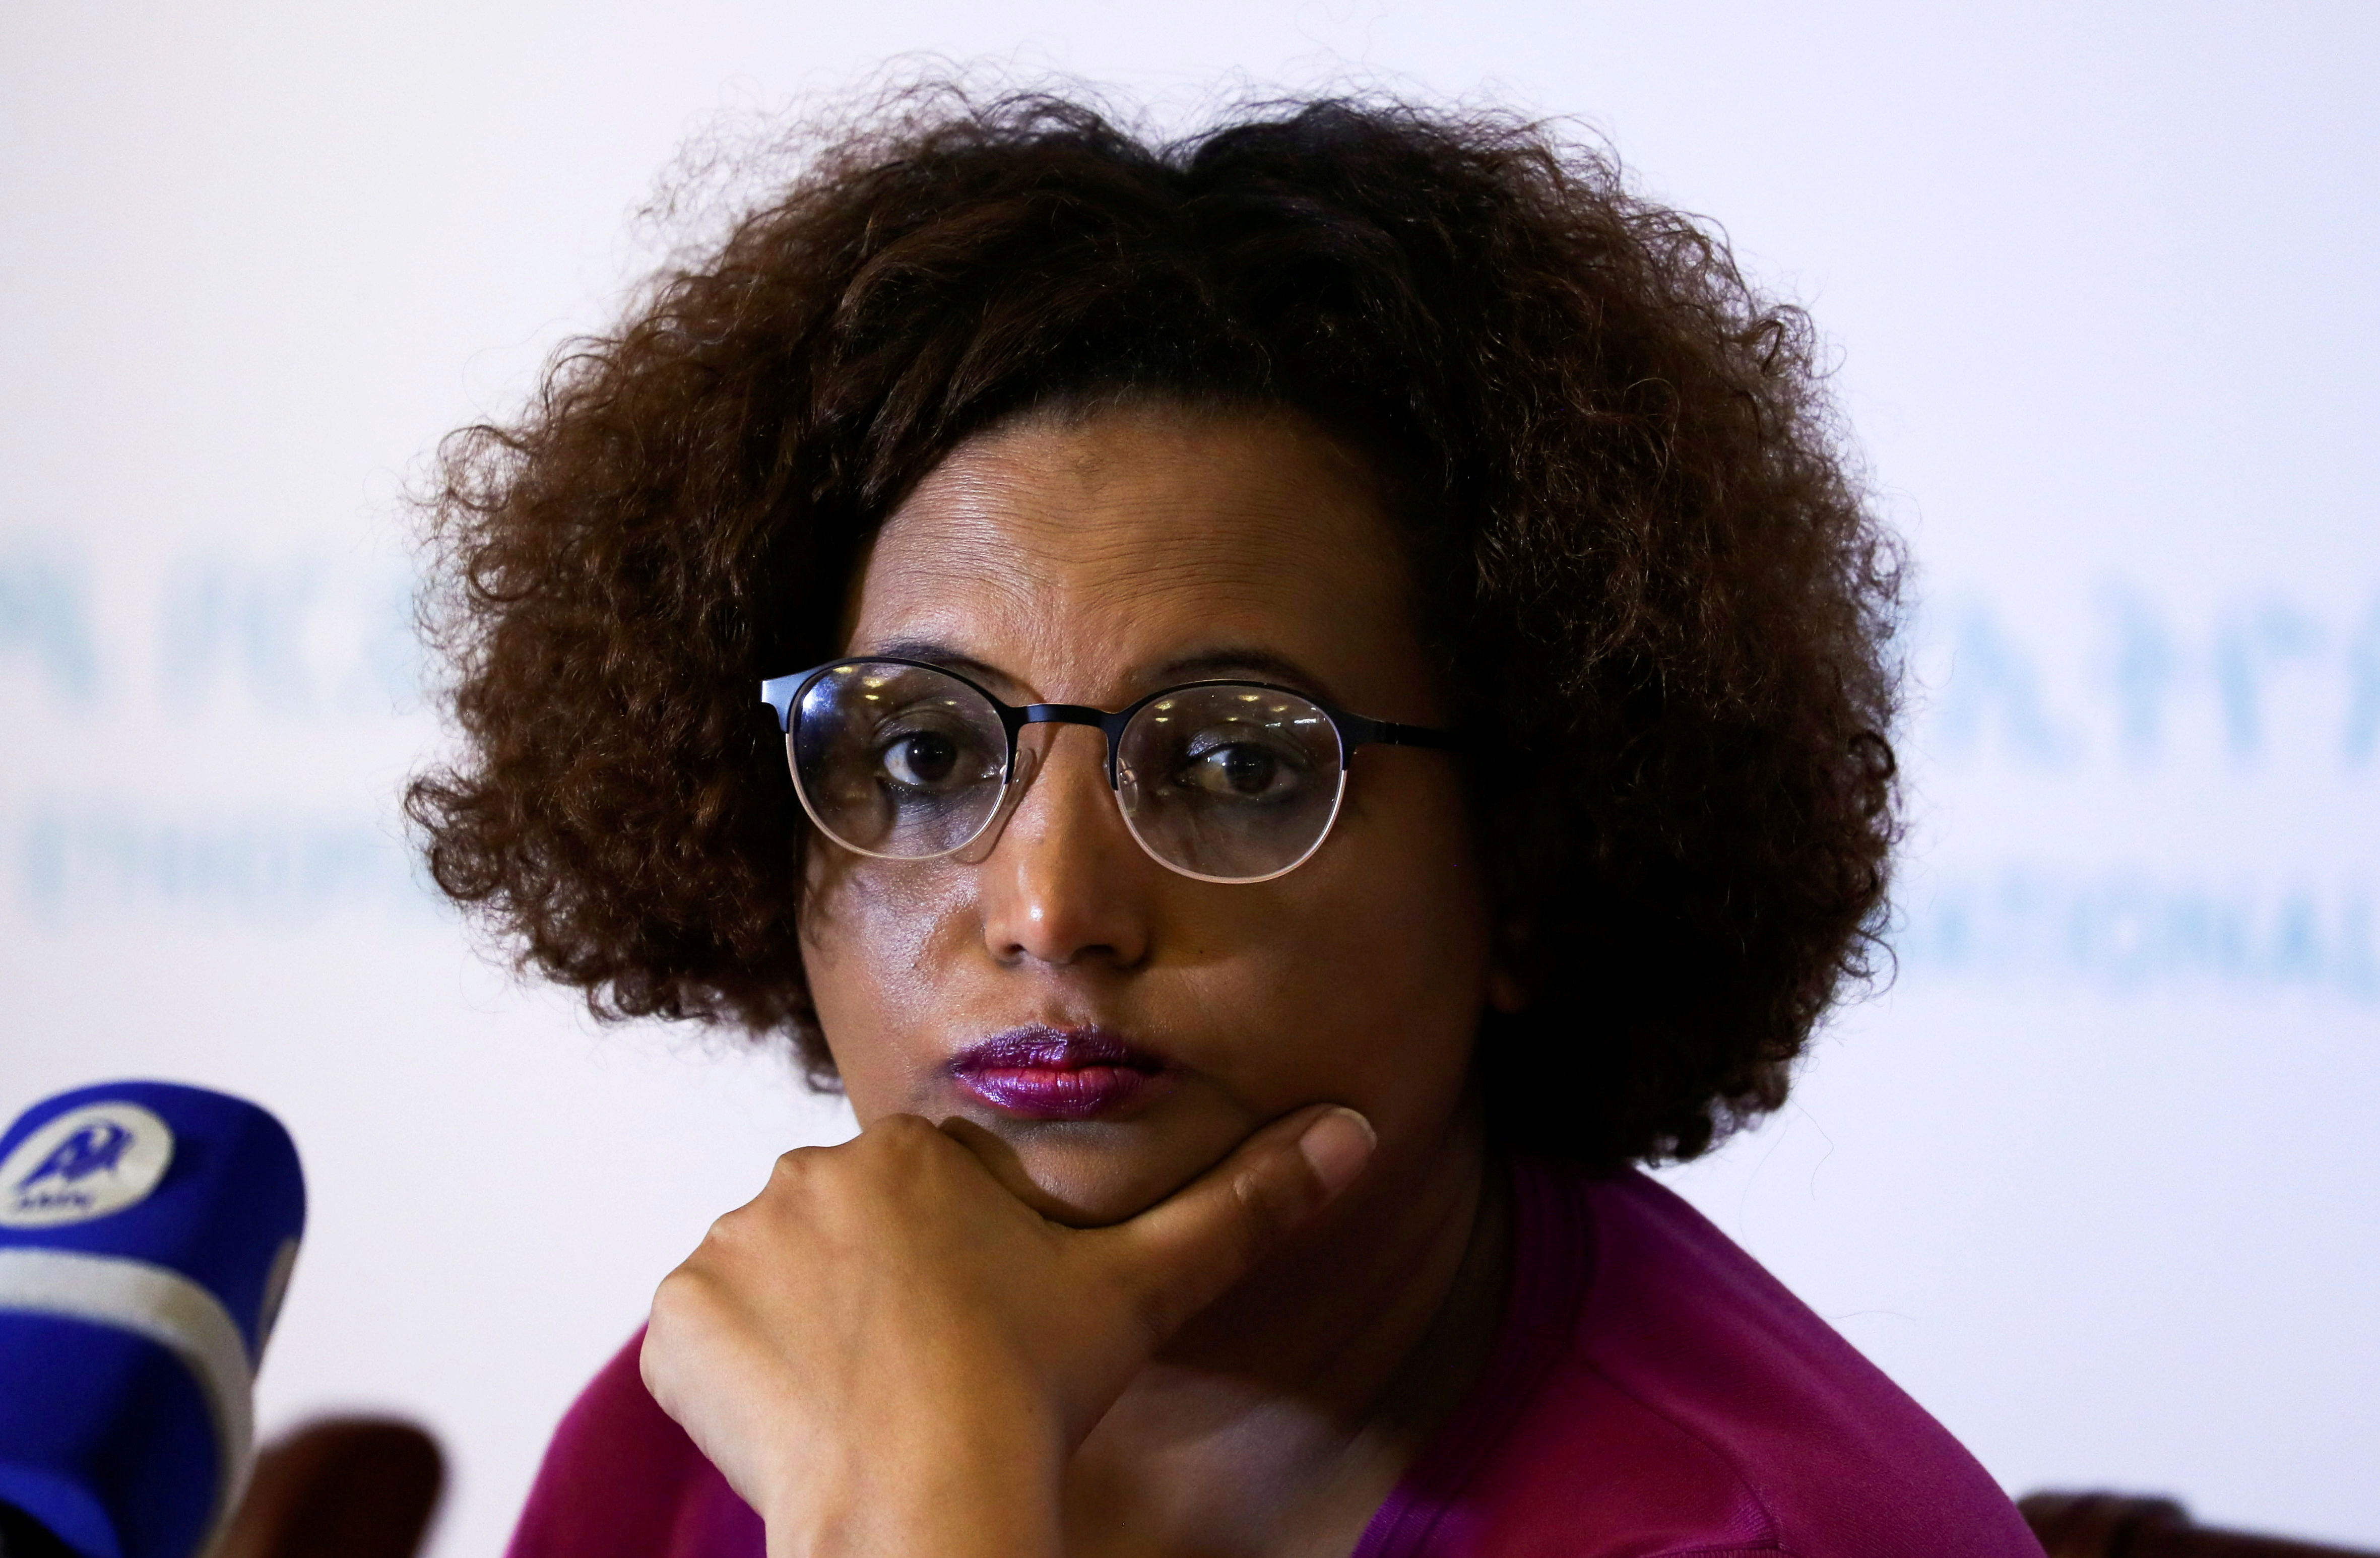 National Electoral Board of Ethiopia Chairperson Birtukan Mideksa addresses a news conference on the upcoming election in Addis Ababa